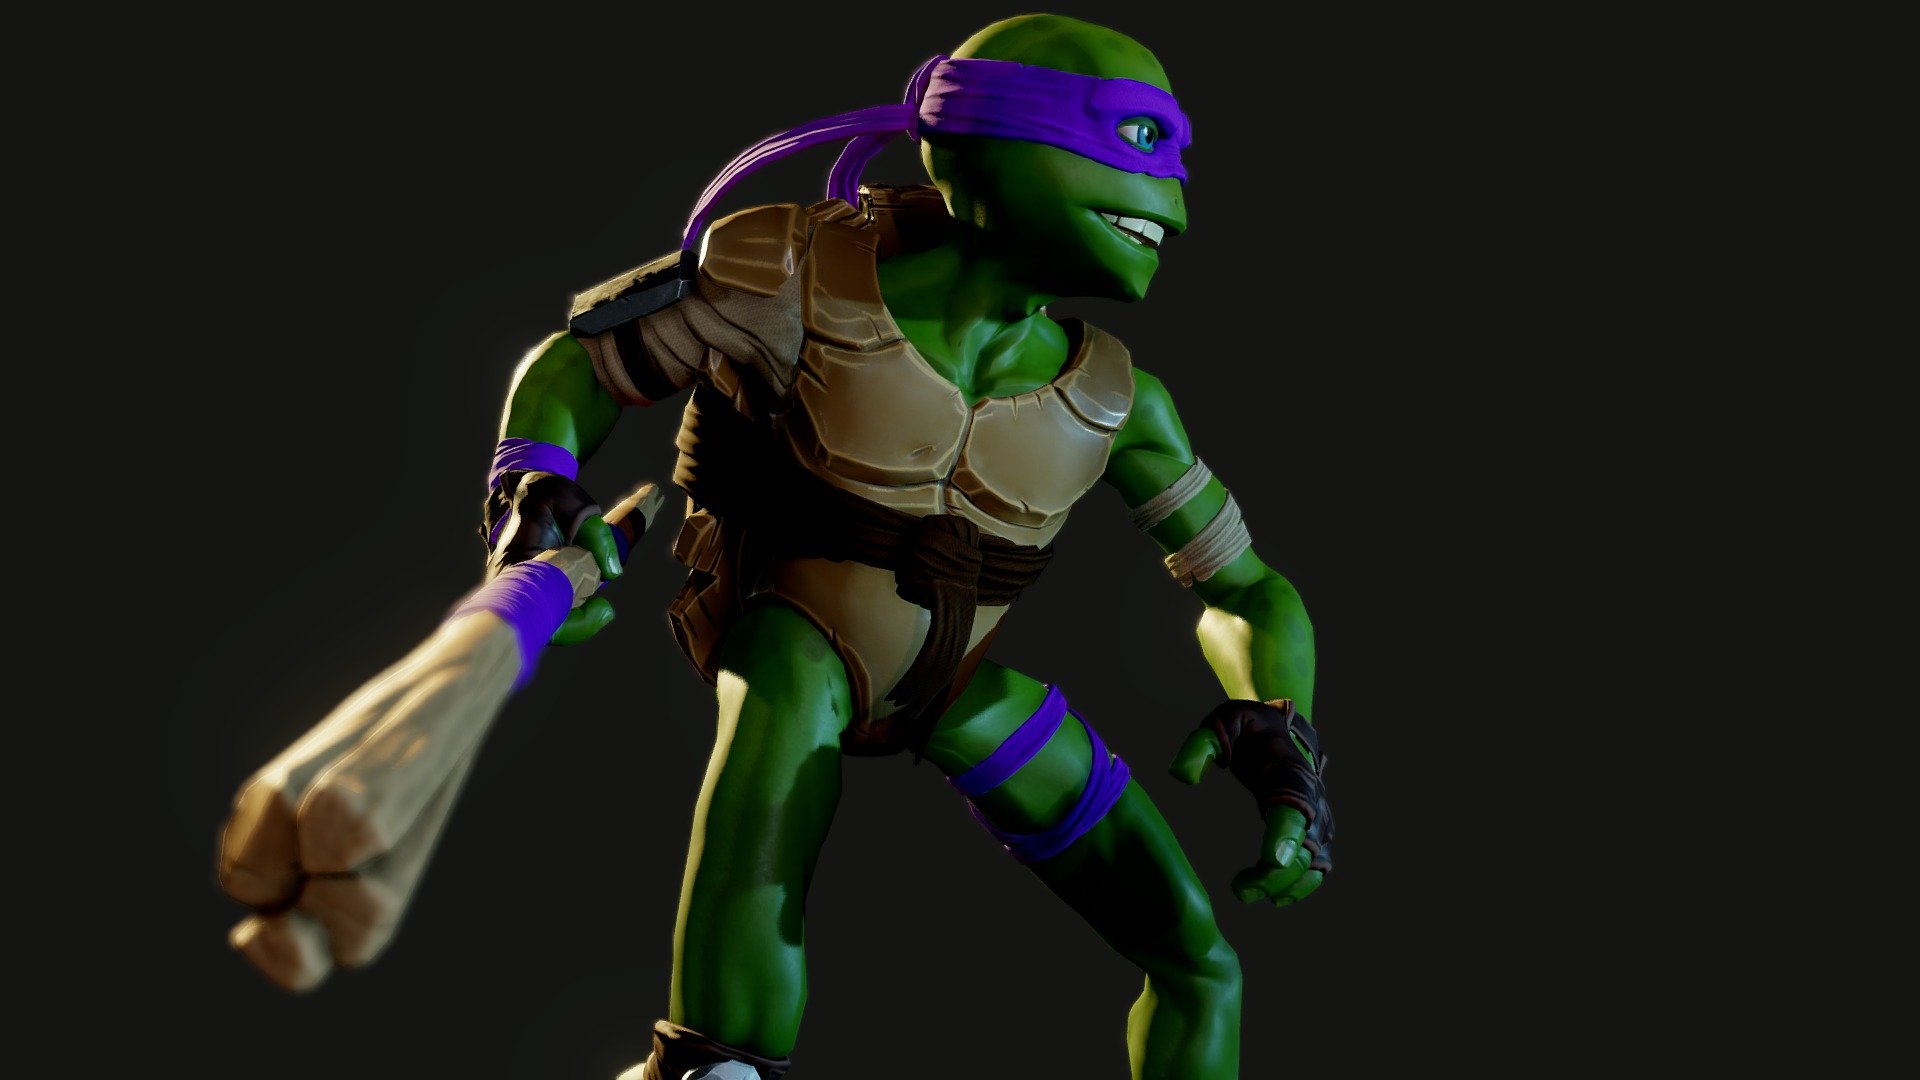 Low poly TMNT character ive been working on and off of for a while now, glad to finally have it at a stage im happy with. I took influence from alot of designs, and created my own spin of the ninja turtle, closer to the original cartoons and keeping a nice stylisation to the proportions.

The rigging, skinning and animation has been done by my talented friend Kuruvilla Varghese

There are still some skinning issues here but will work on fixing those up and adding more cool animations soon! - TMNT Donatello - 3D model by jonmills3d 3d model